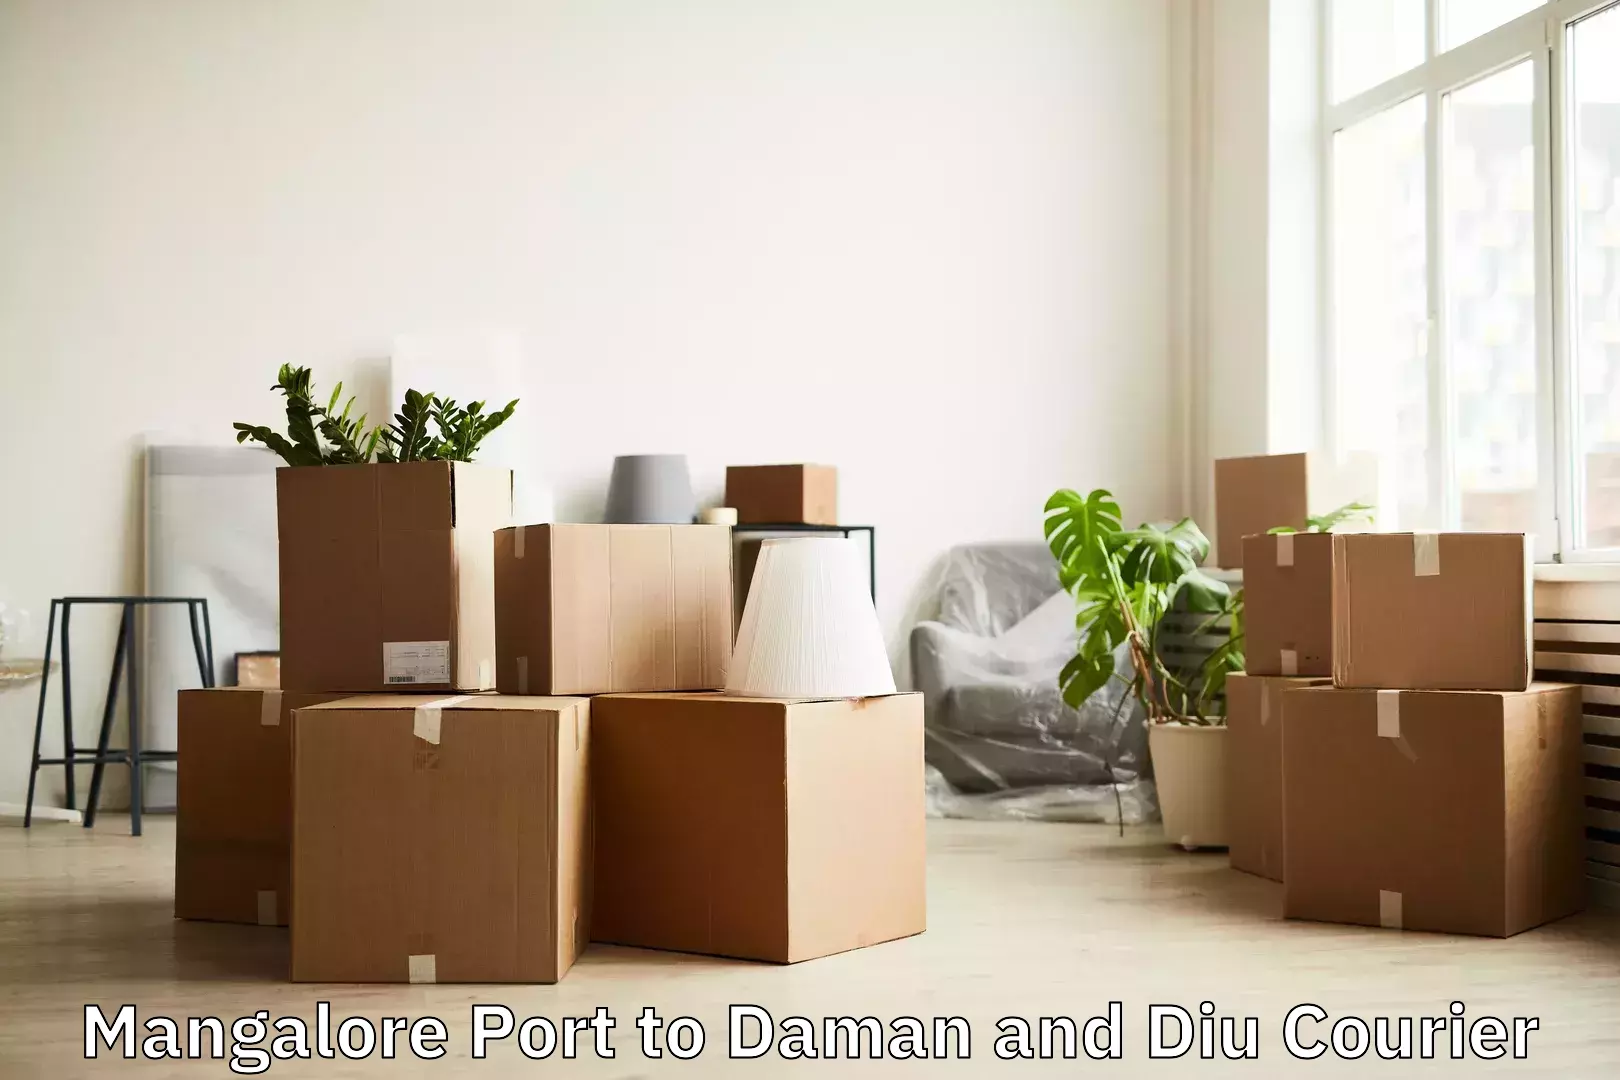 Baggage relocation service in Mangalore Port to Daman